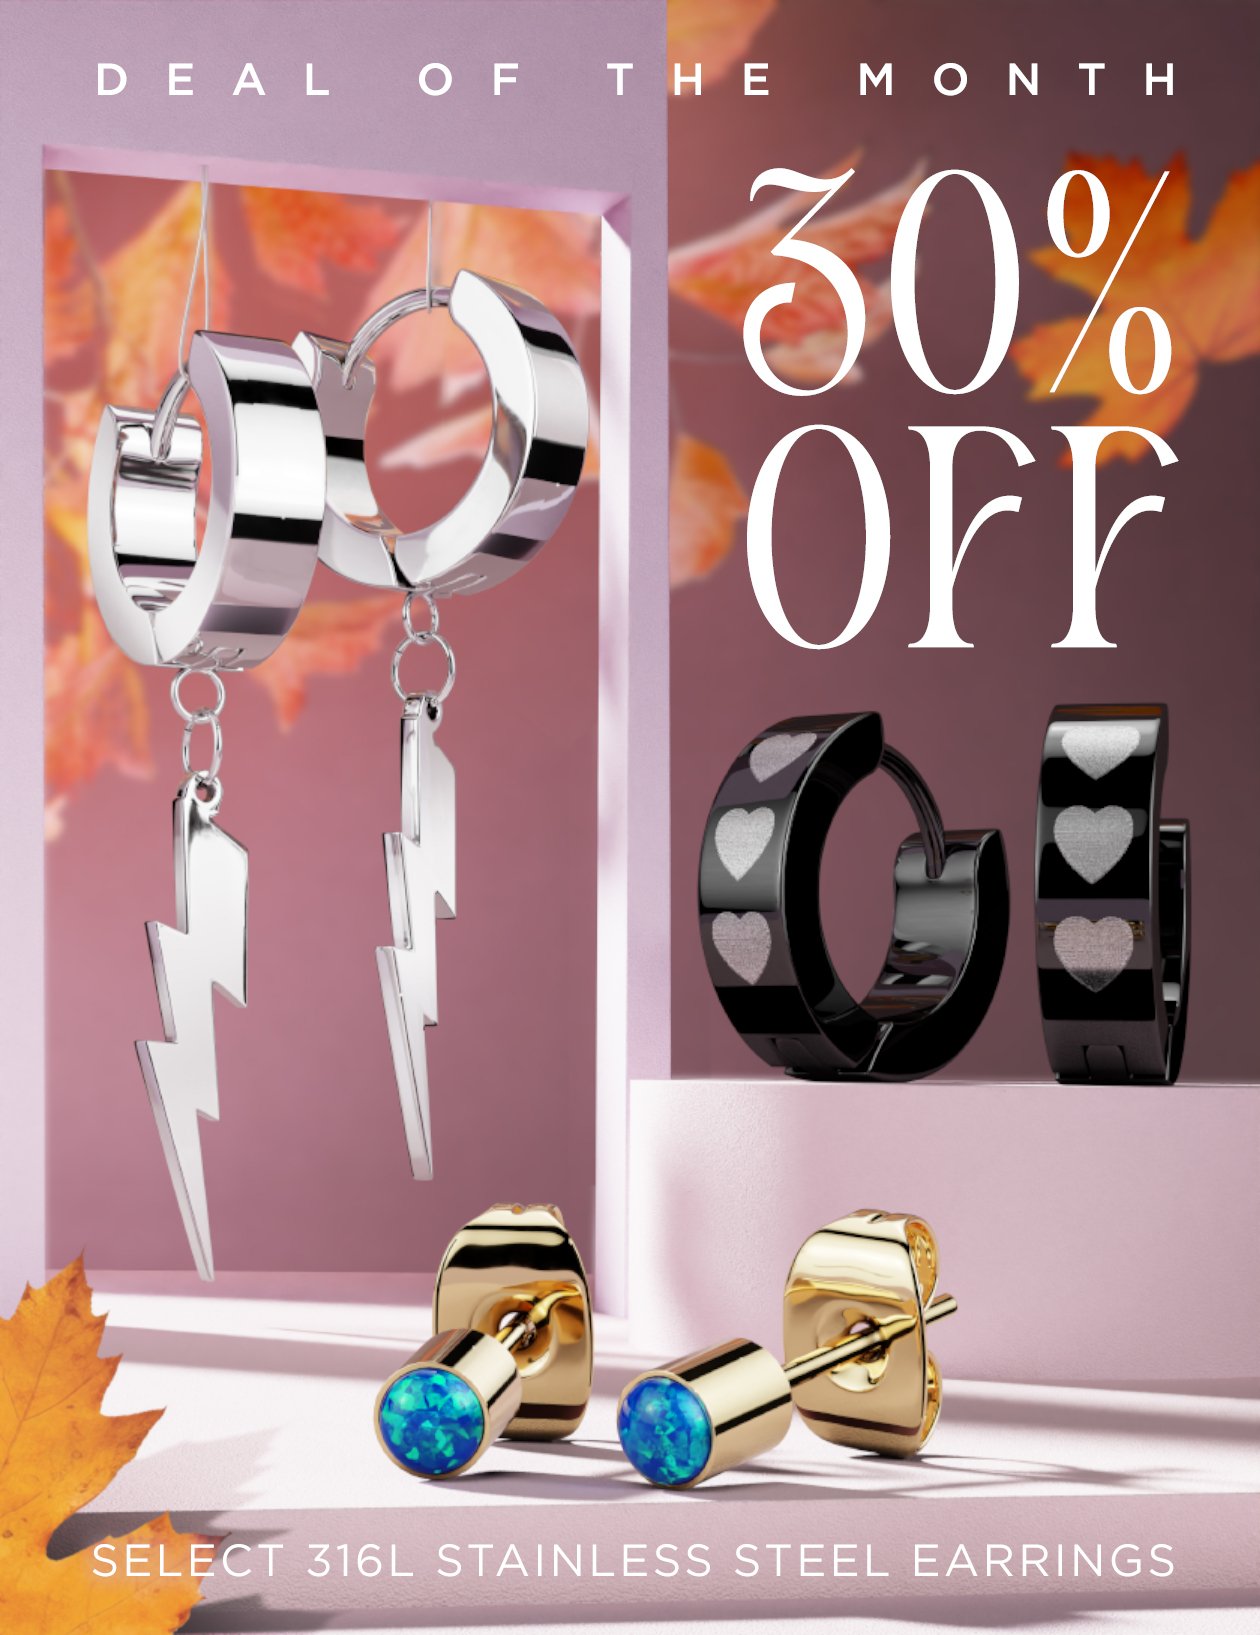 30% off assorted 316L stainless steel earrings, from studs for piercers to stock up on to TikTok-worthy hype designs.